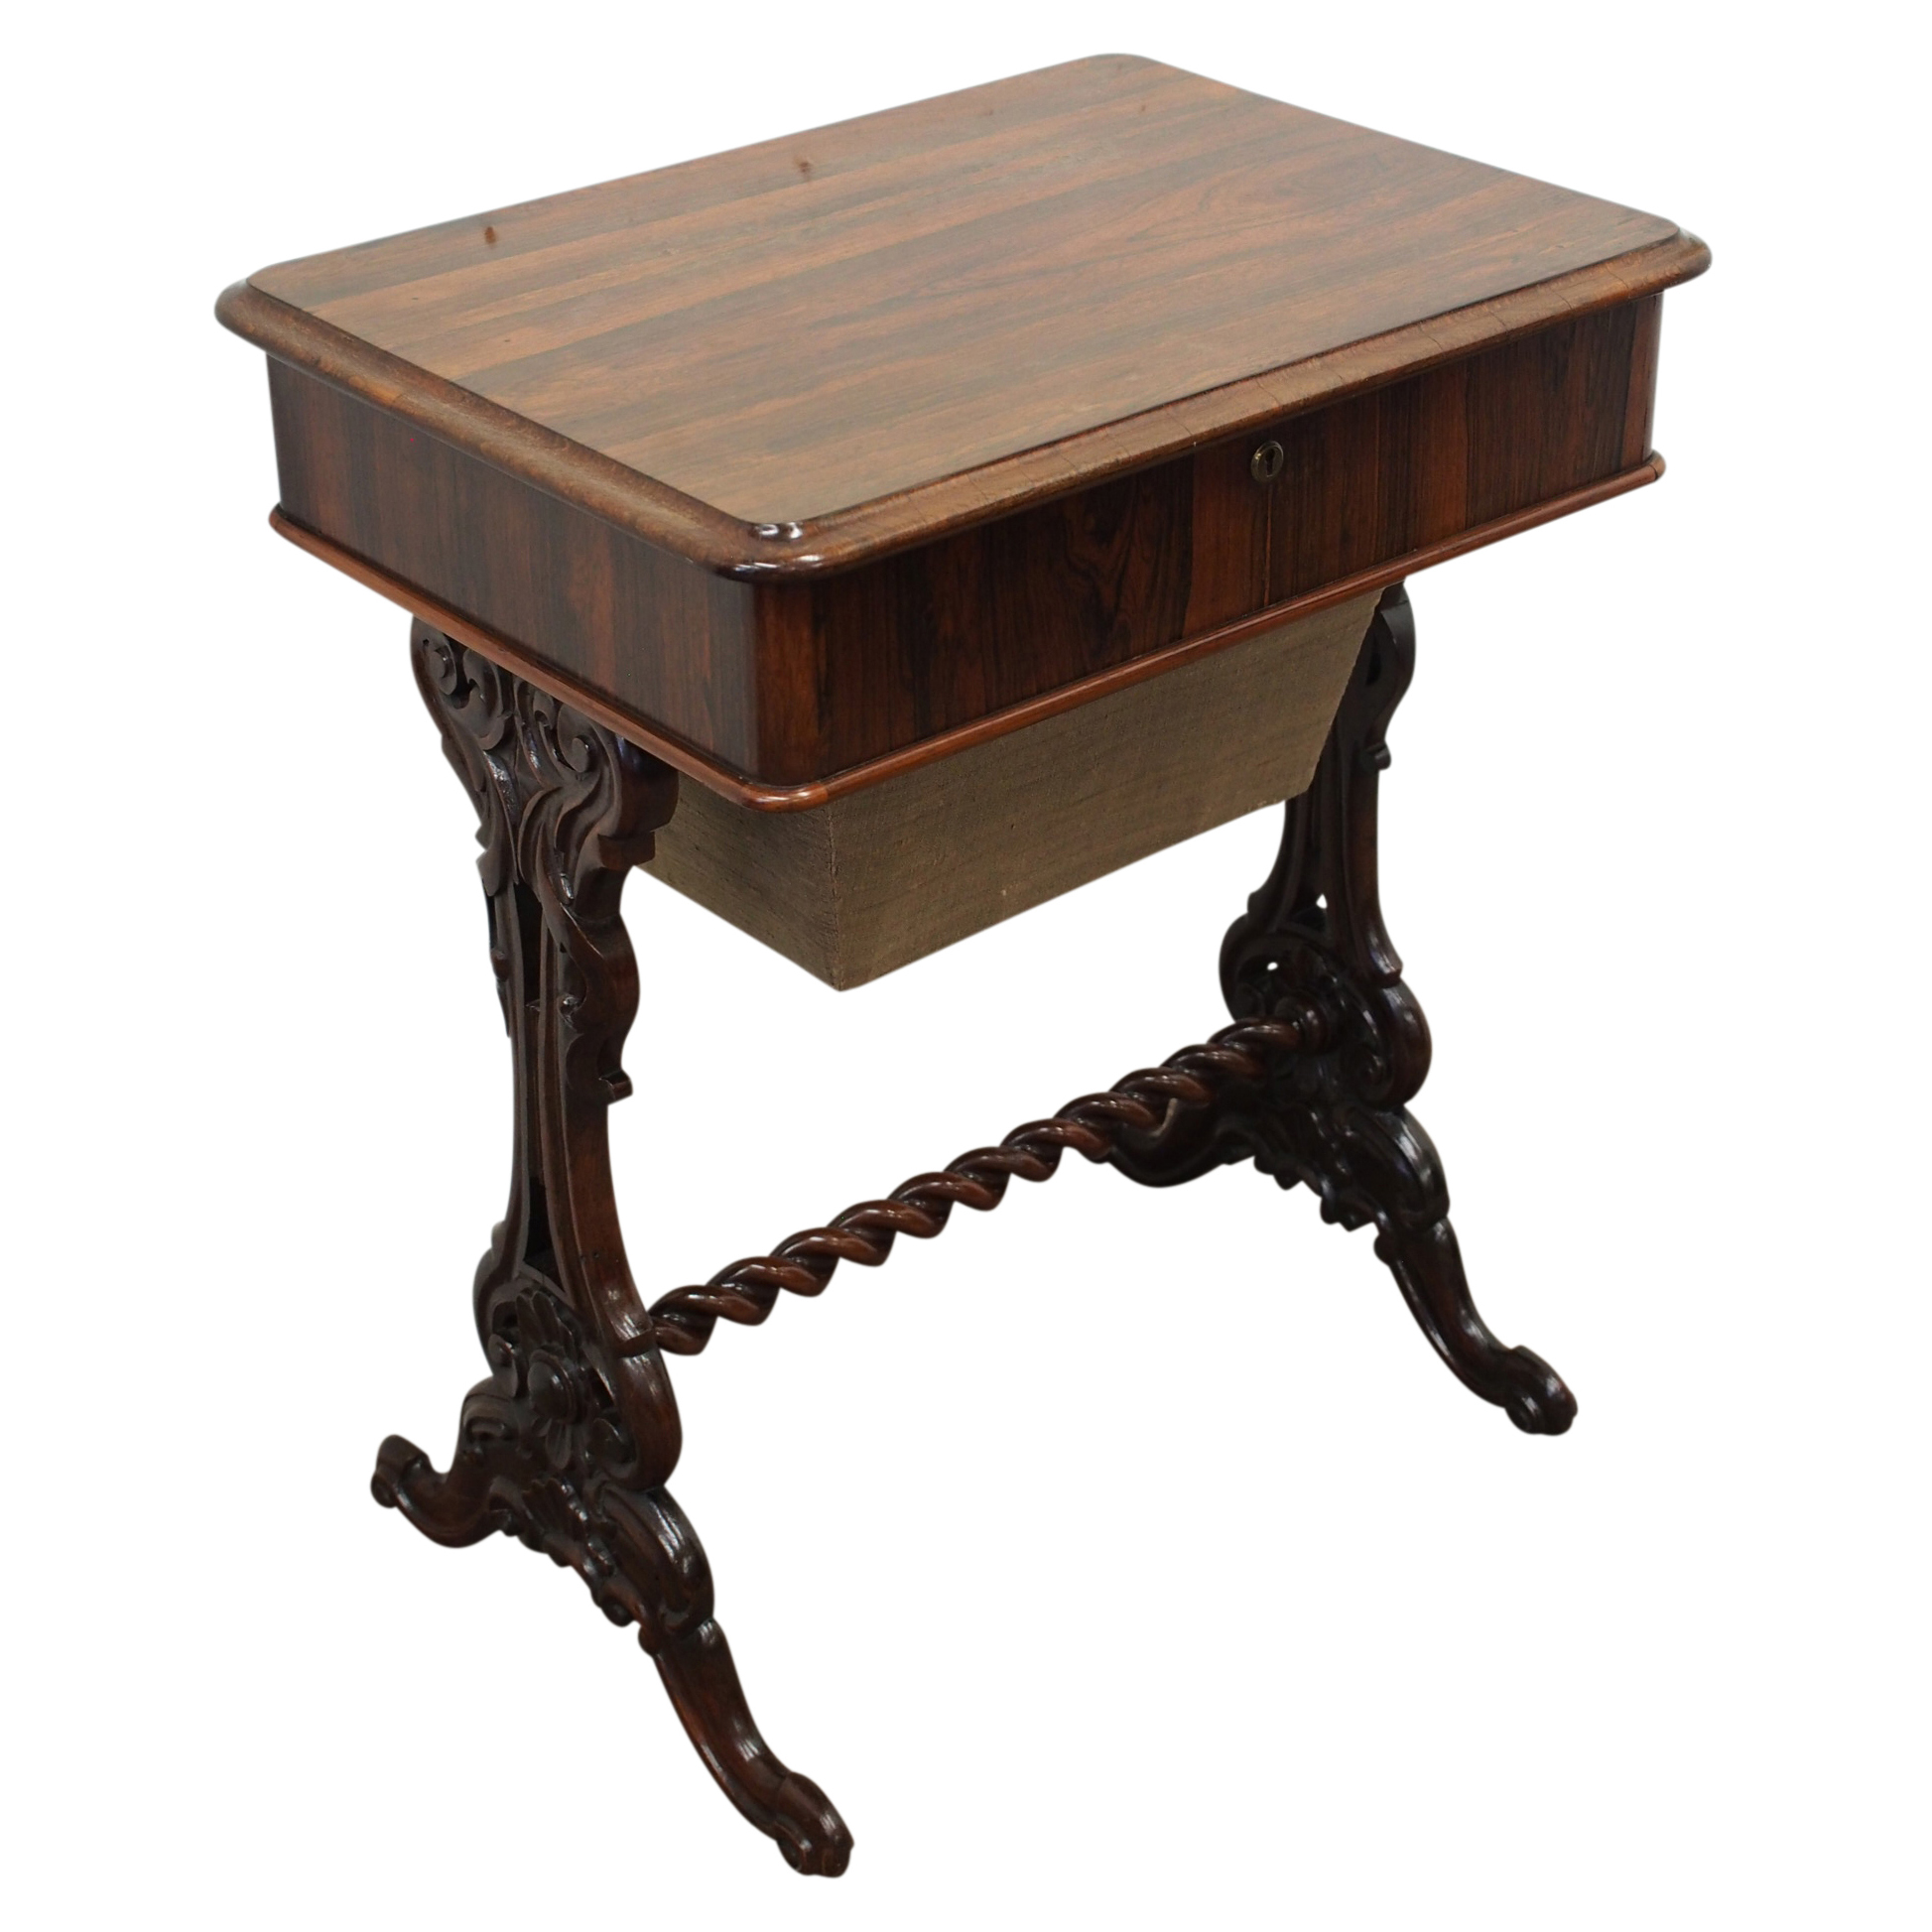 Victorian Rosewood Work Table Or Sewing Georgian Antiques - How Deep Should A Sewing Table Be